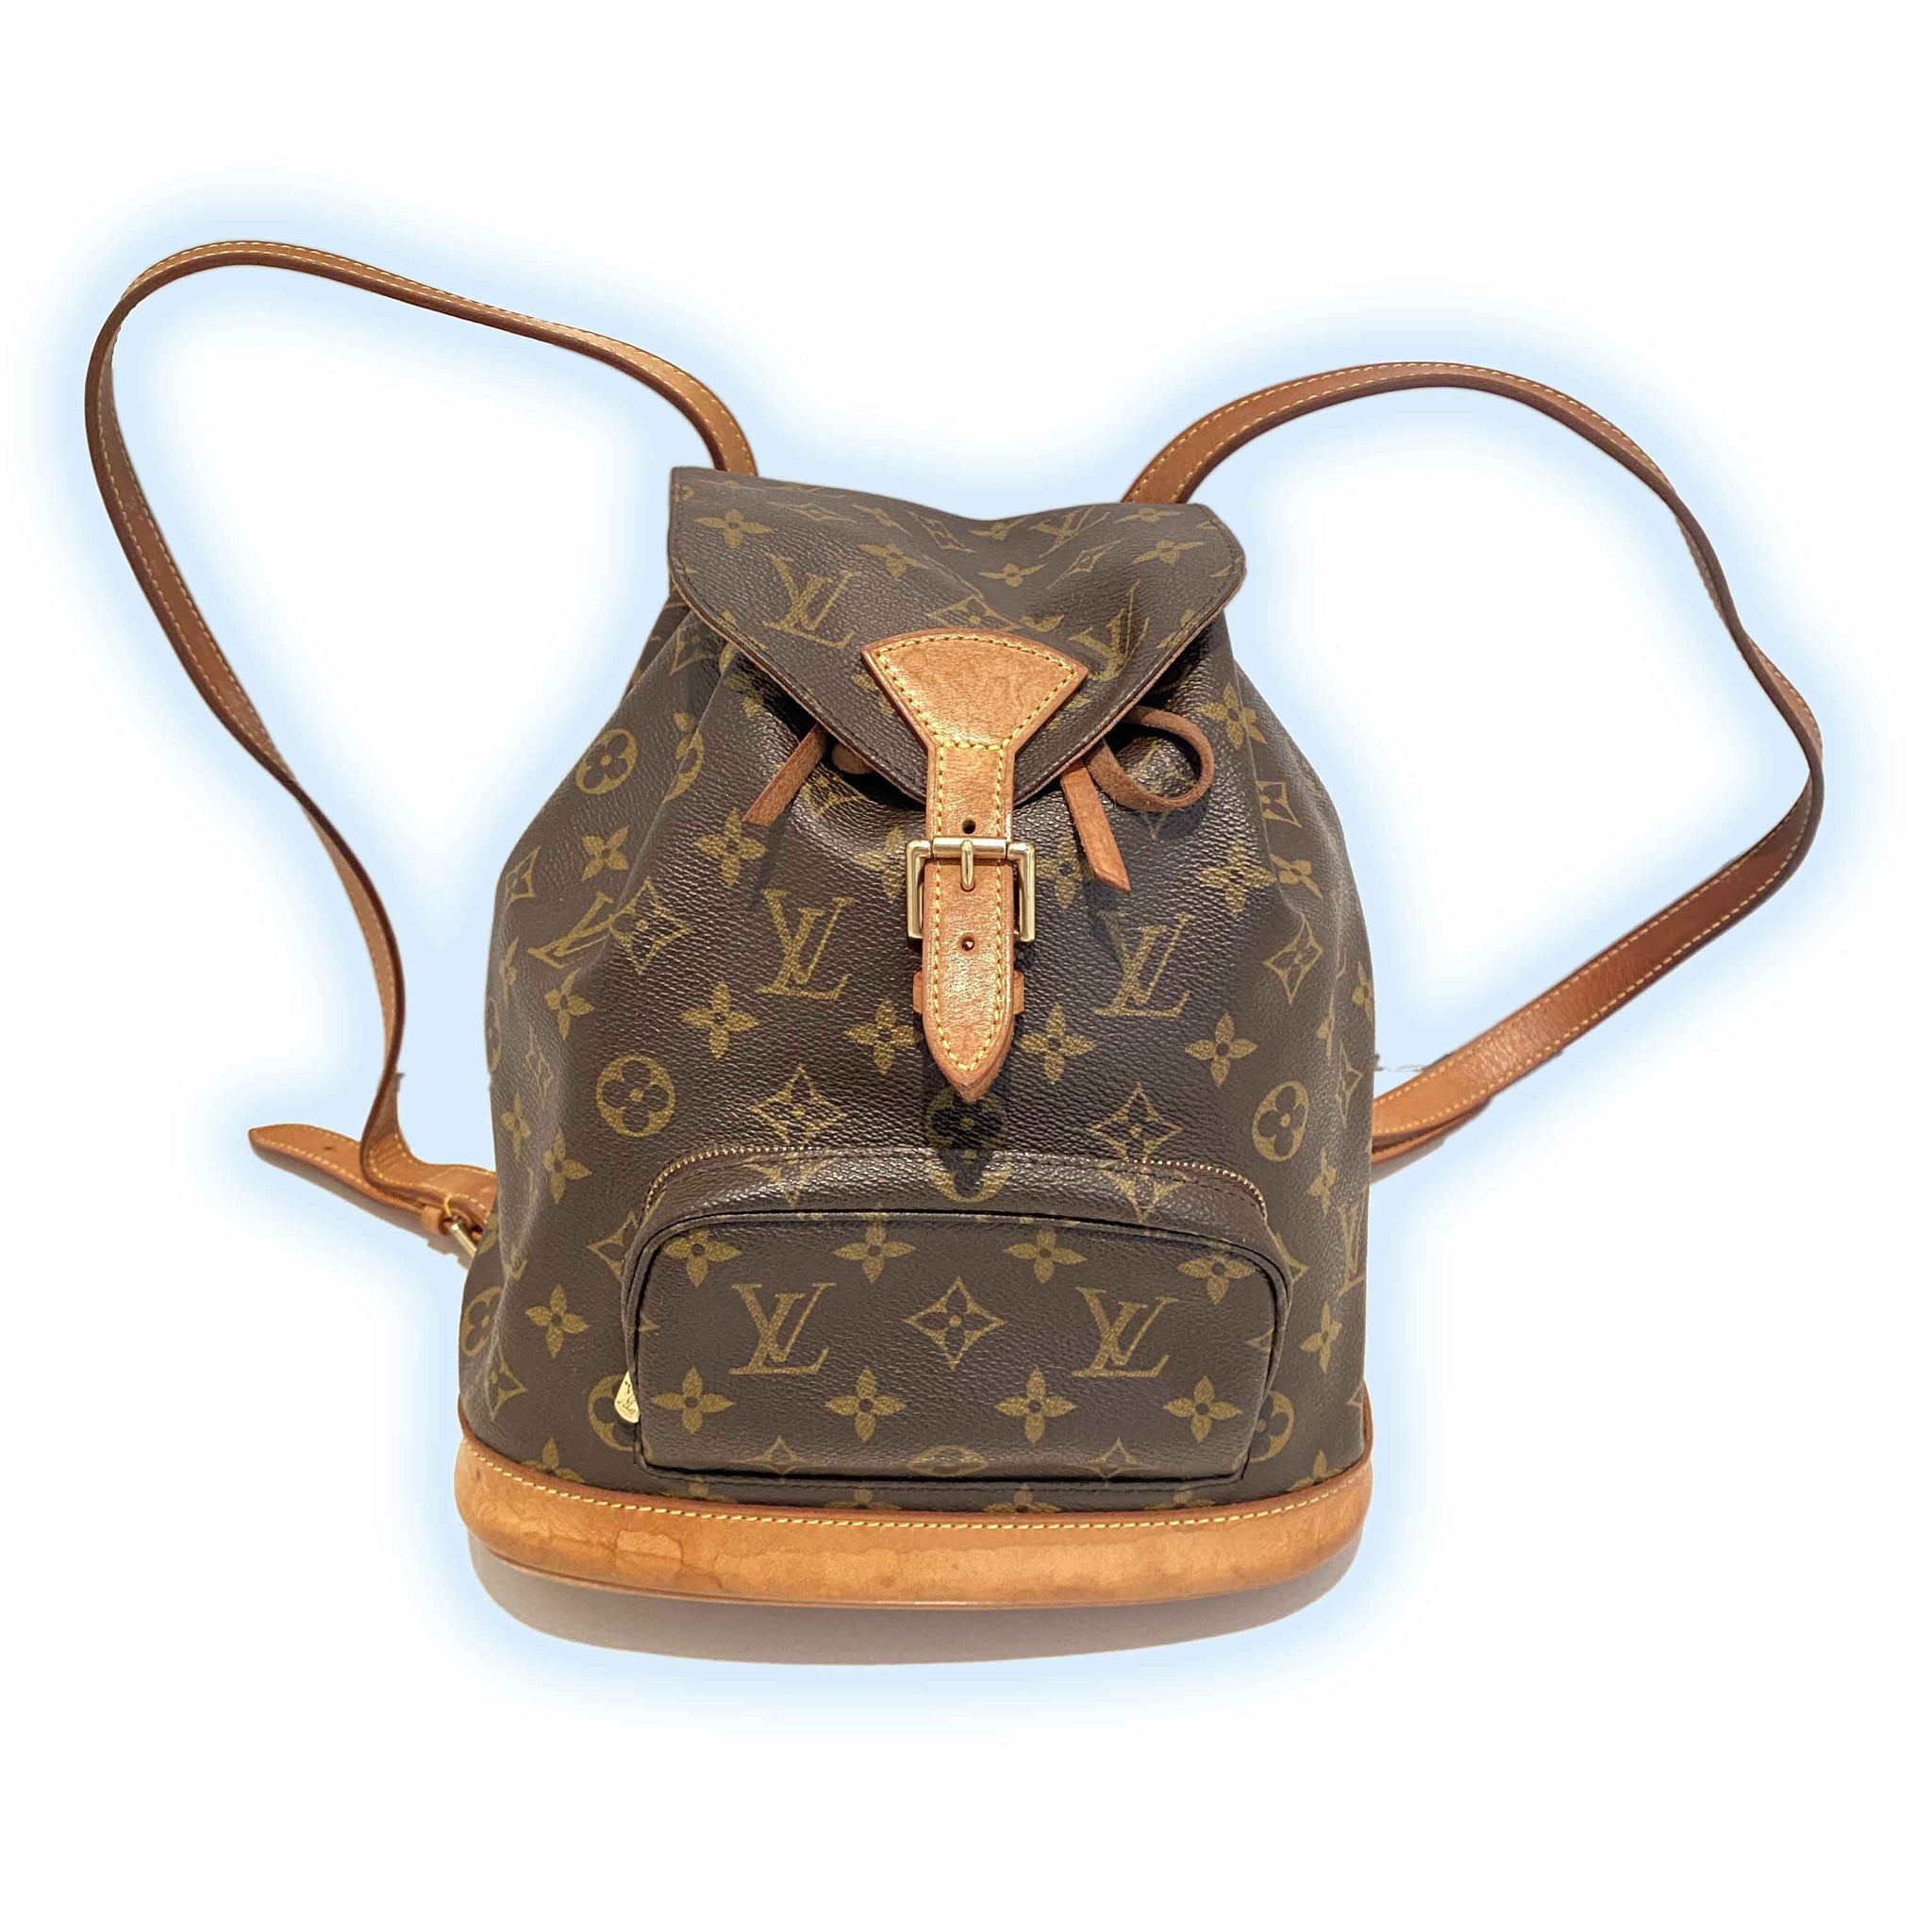 Montsouris Mm Backpack Authentic PreOwned  The Lady Bag